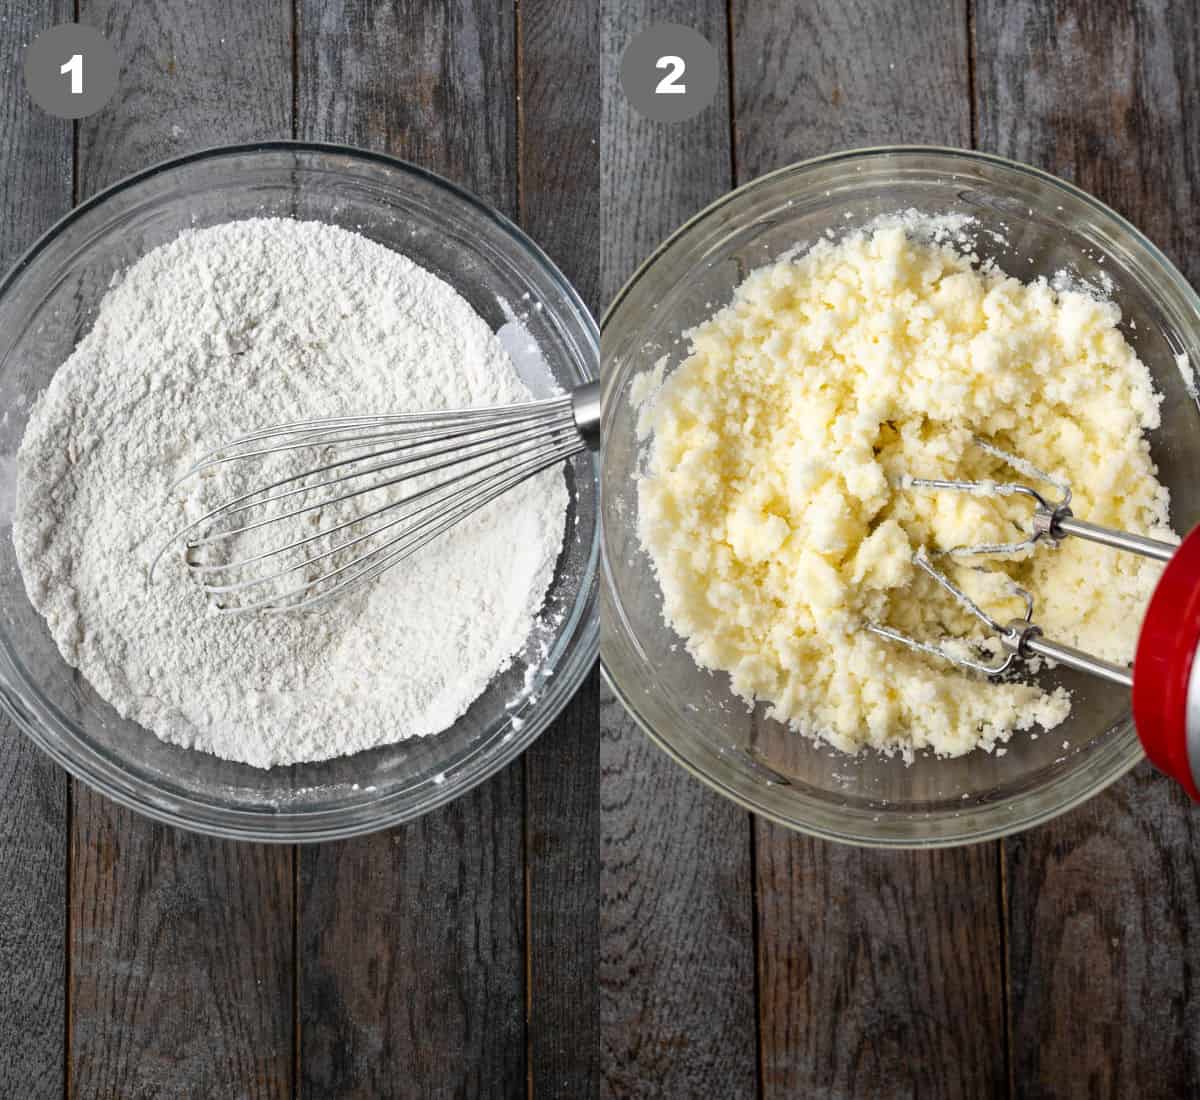 Dry ingredients in a bowl and the butter and sugar creamed in another bowl.